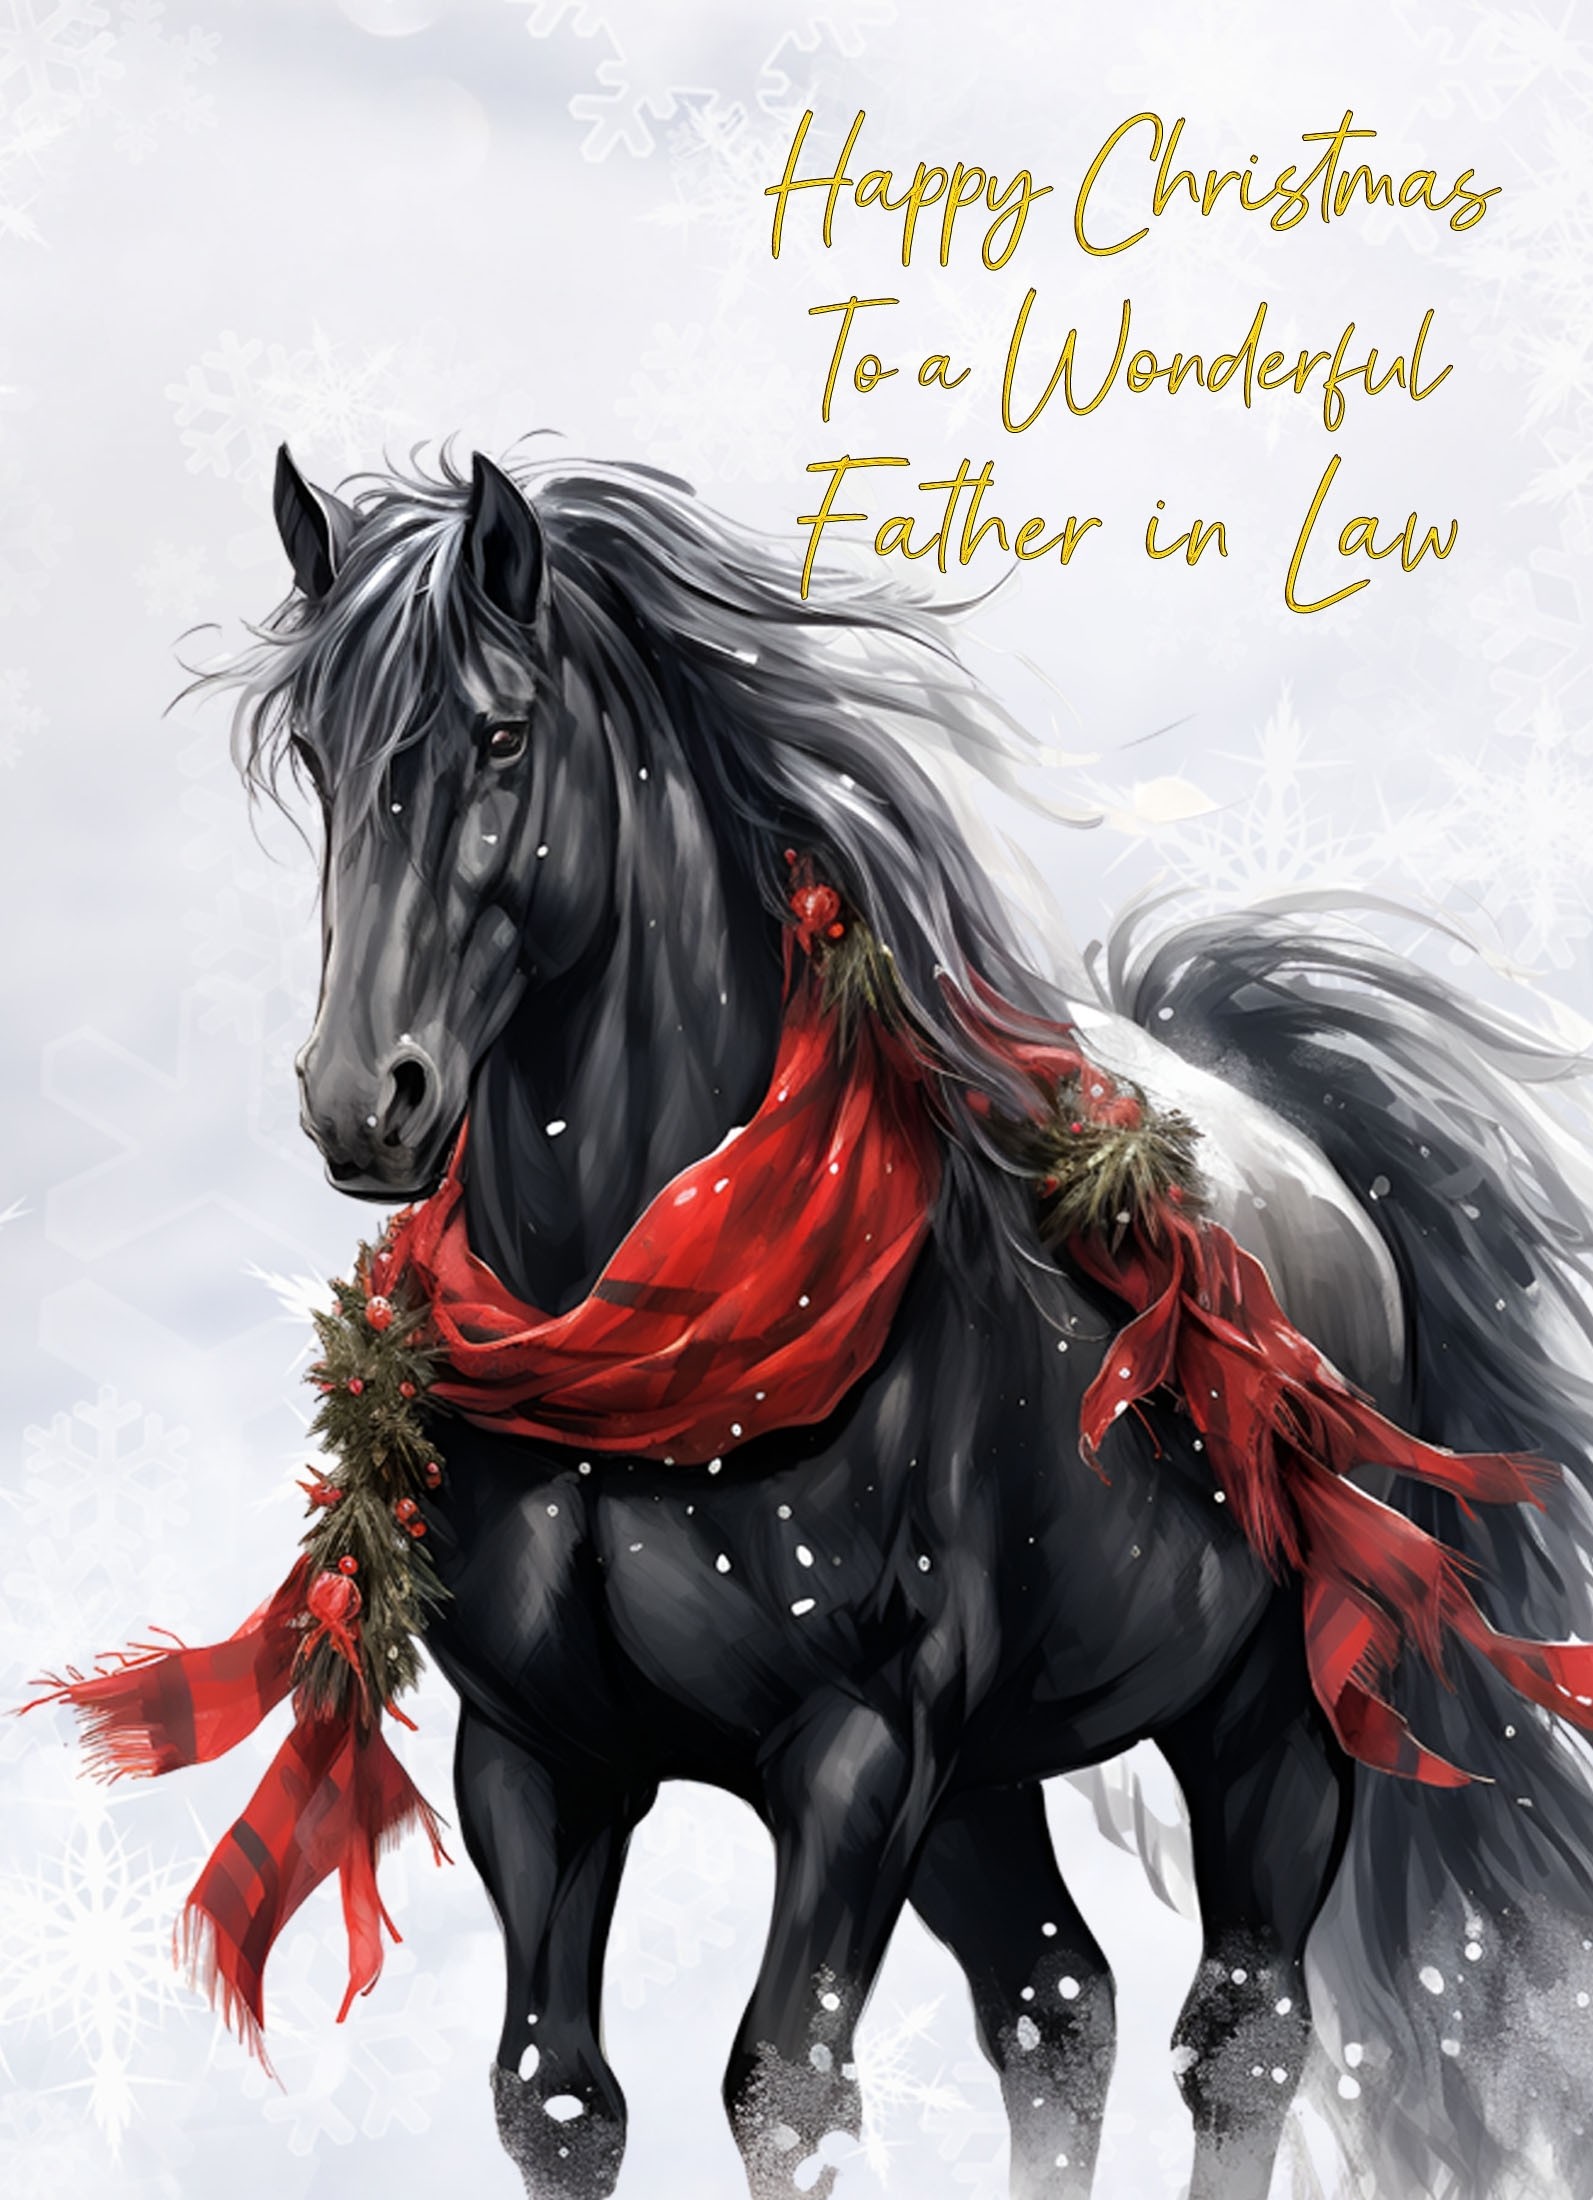 Christmas Card For Father in Law (Horse Art Black)